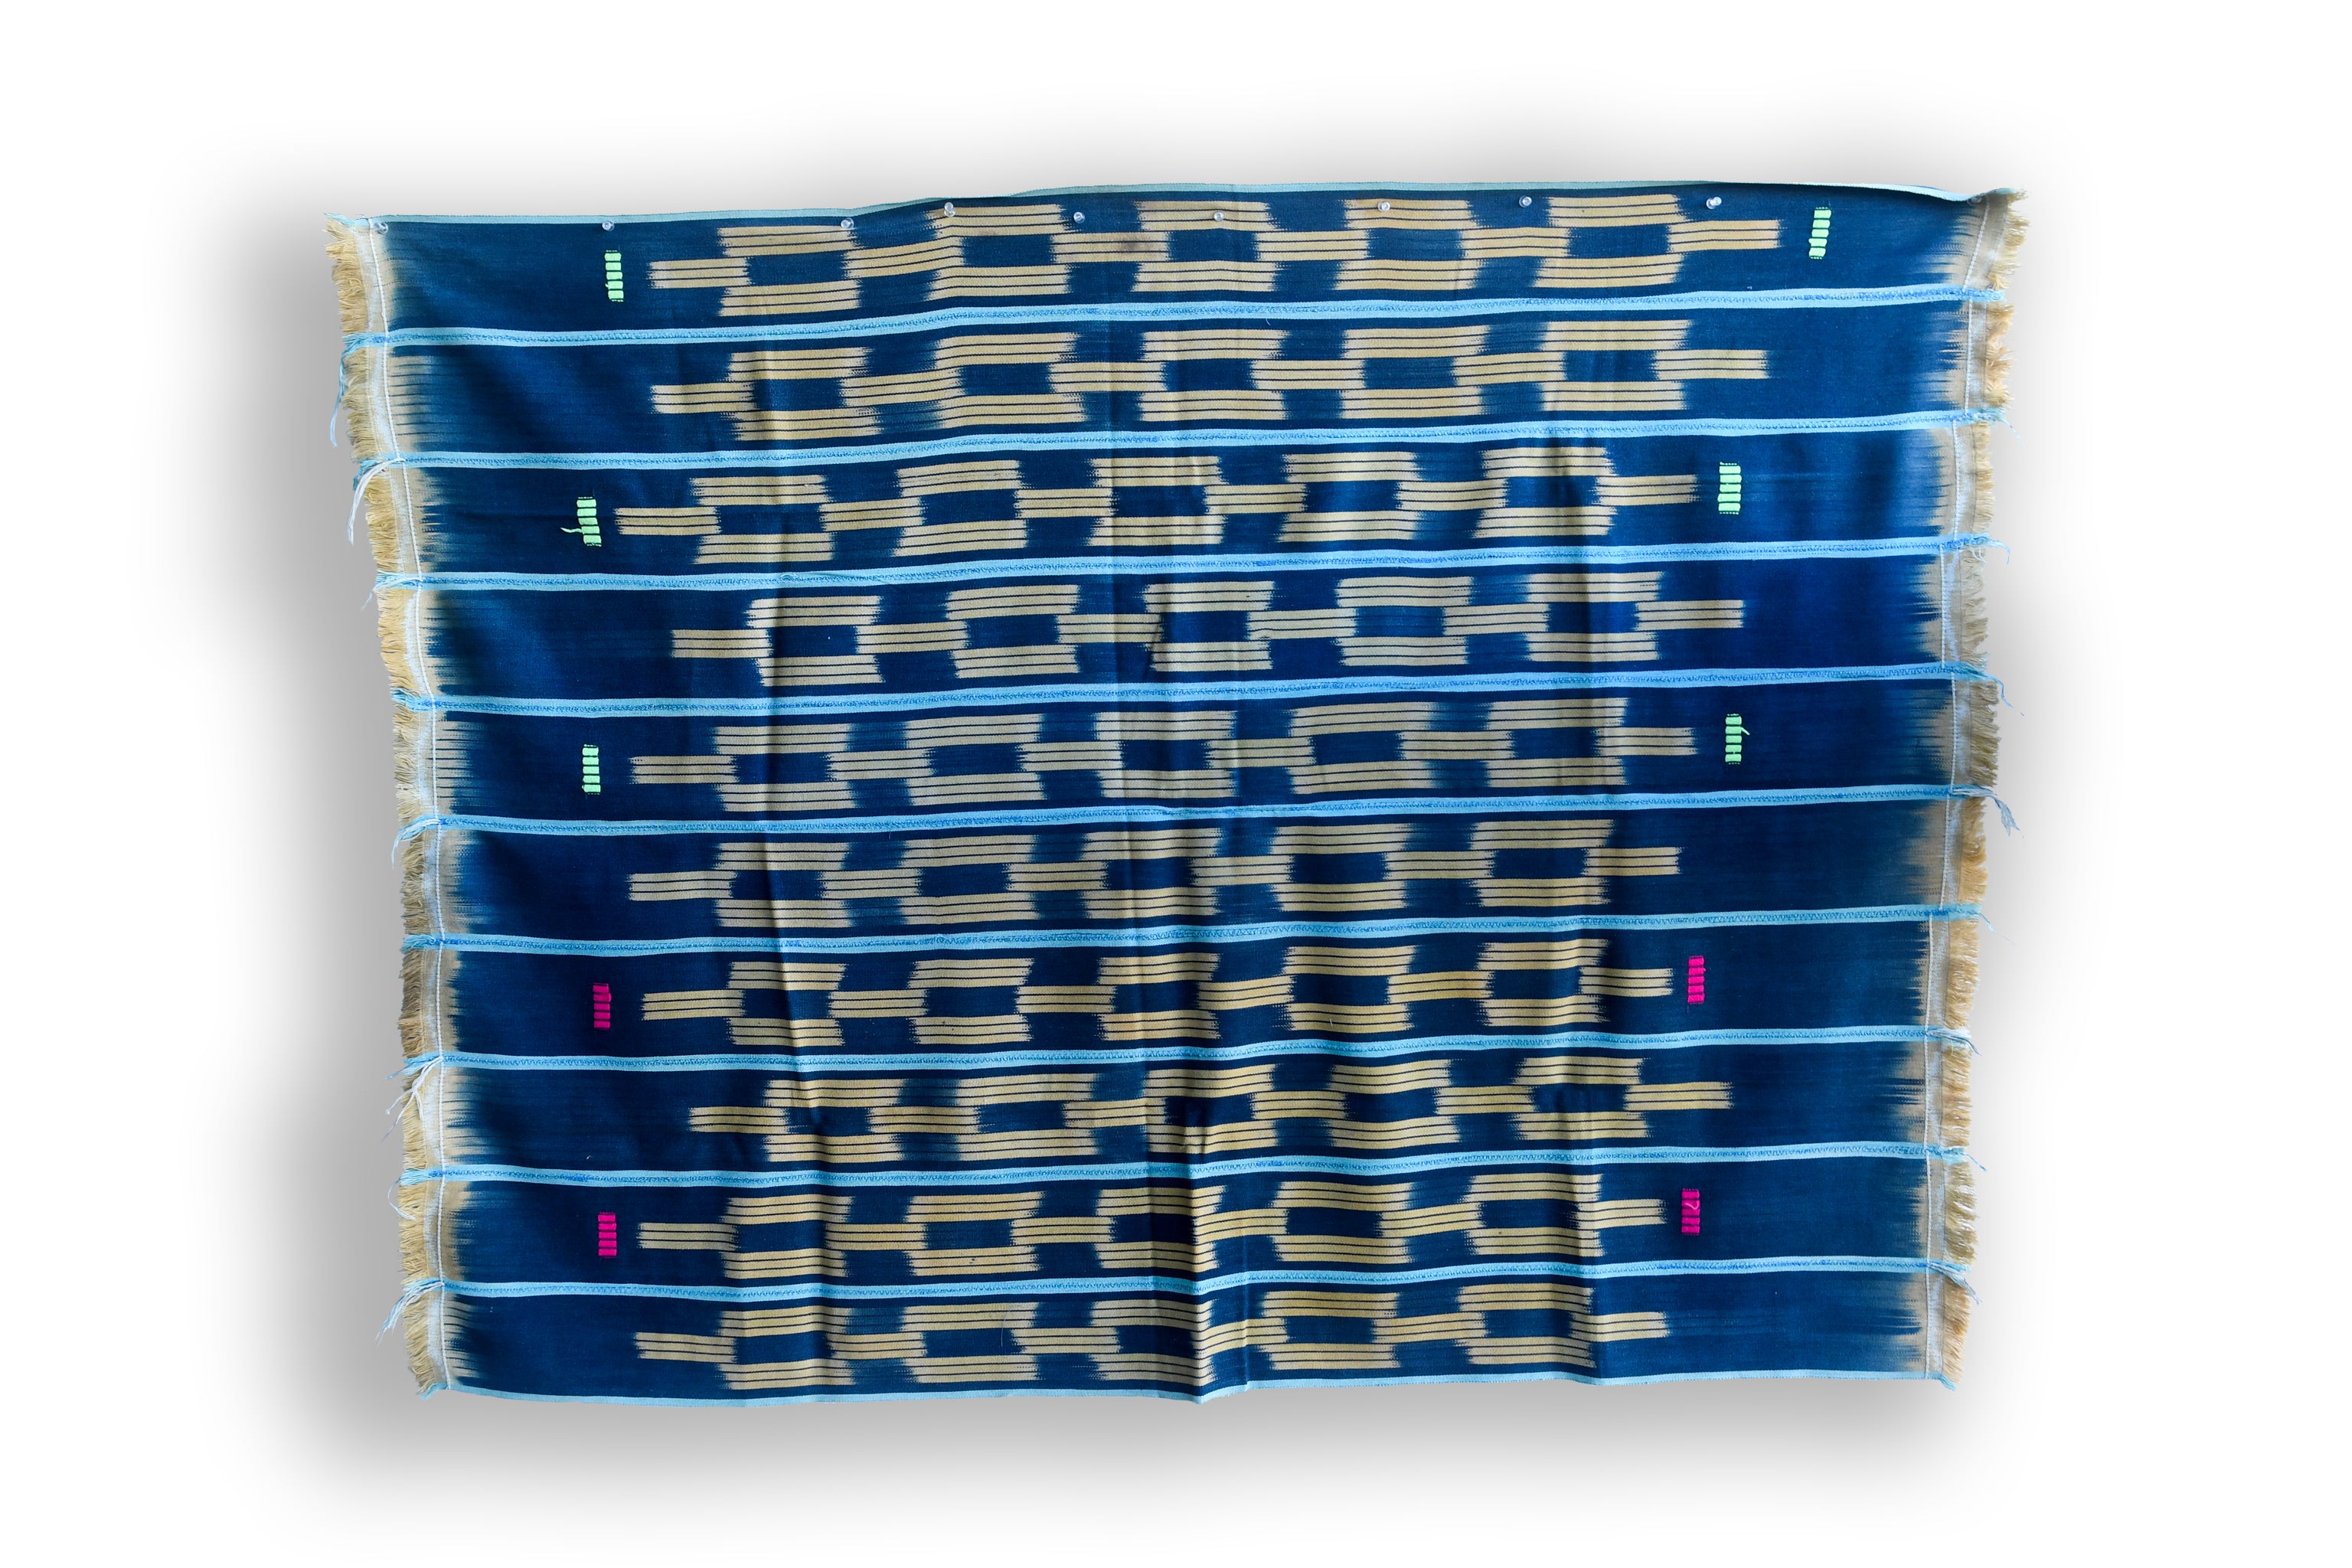 Handcrafted Textiles - Artisan Designed - Handcrafted African Art Textiles - Home Decor - Living Spaces - Mix Colors - Bold Patterns - Traditional Designs - African Culture - This Indigo Tie Dyed Ikat Fabric is crafted from an African cotton textile, inspired by a vintage Baule design. Length: 55 inches Width: 41 inches